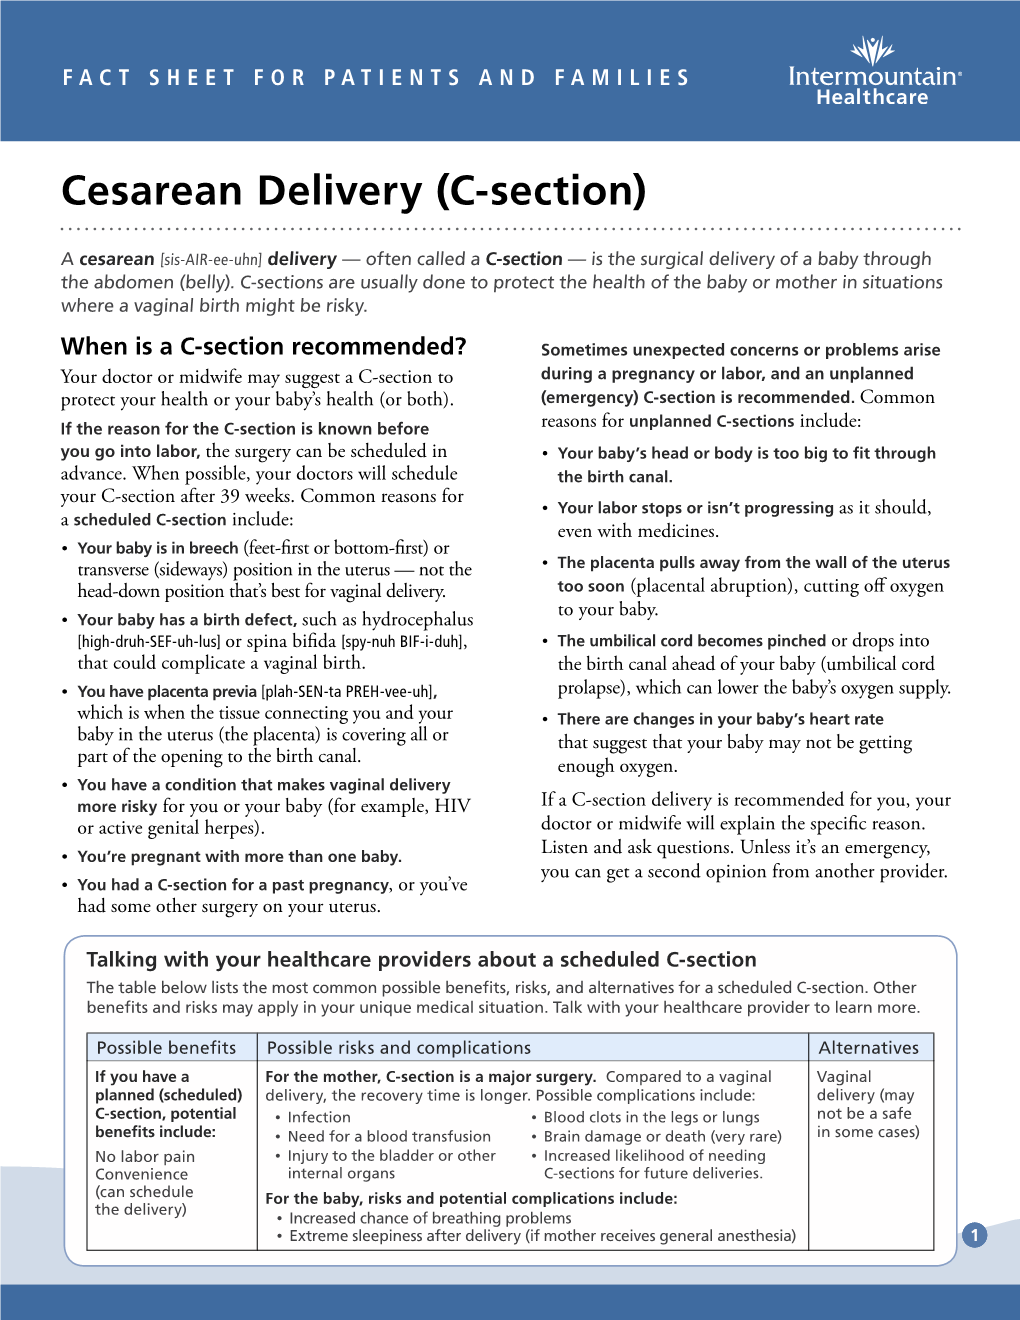 Cesarean Delivery (C-Section) Fact Sheet